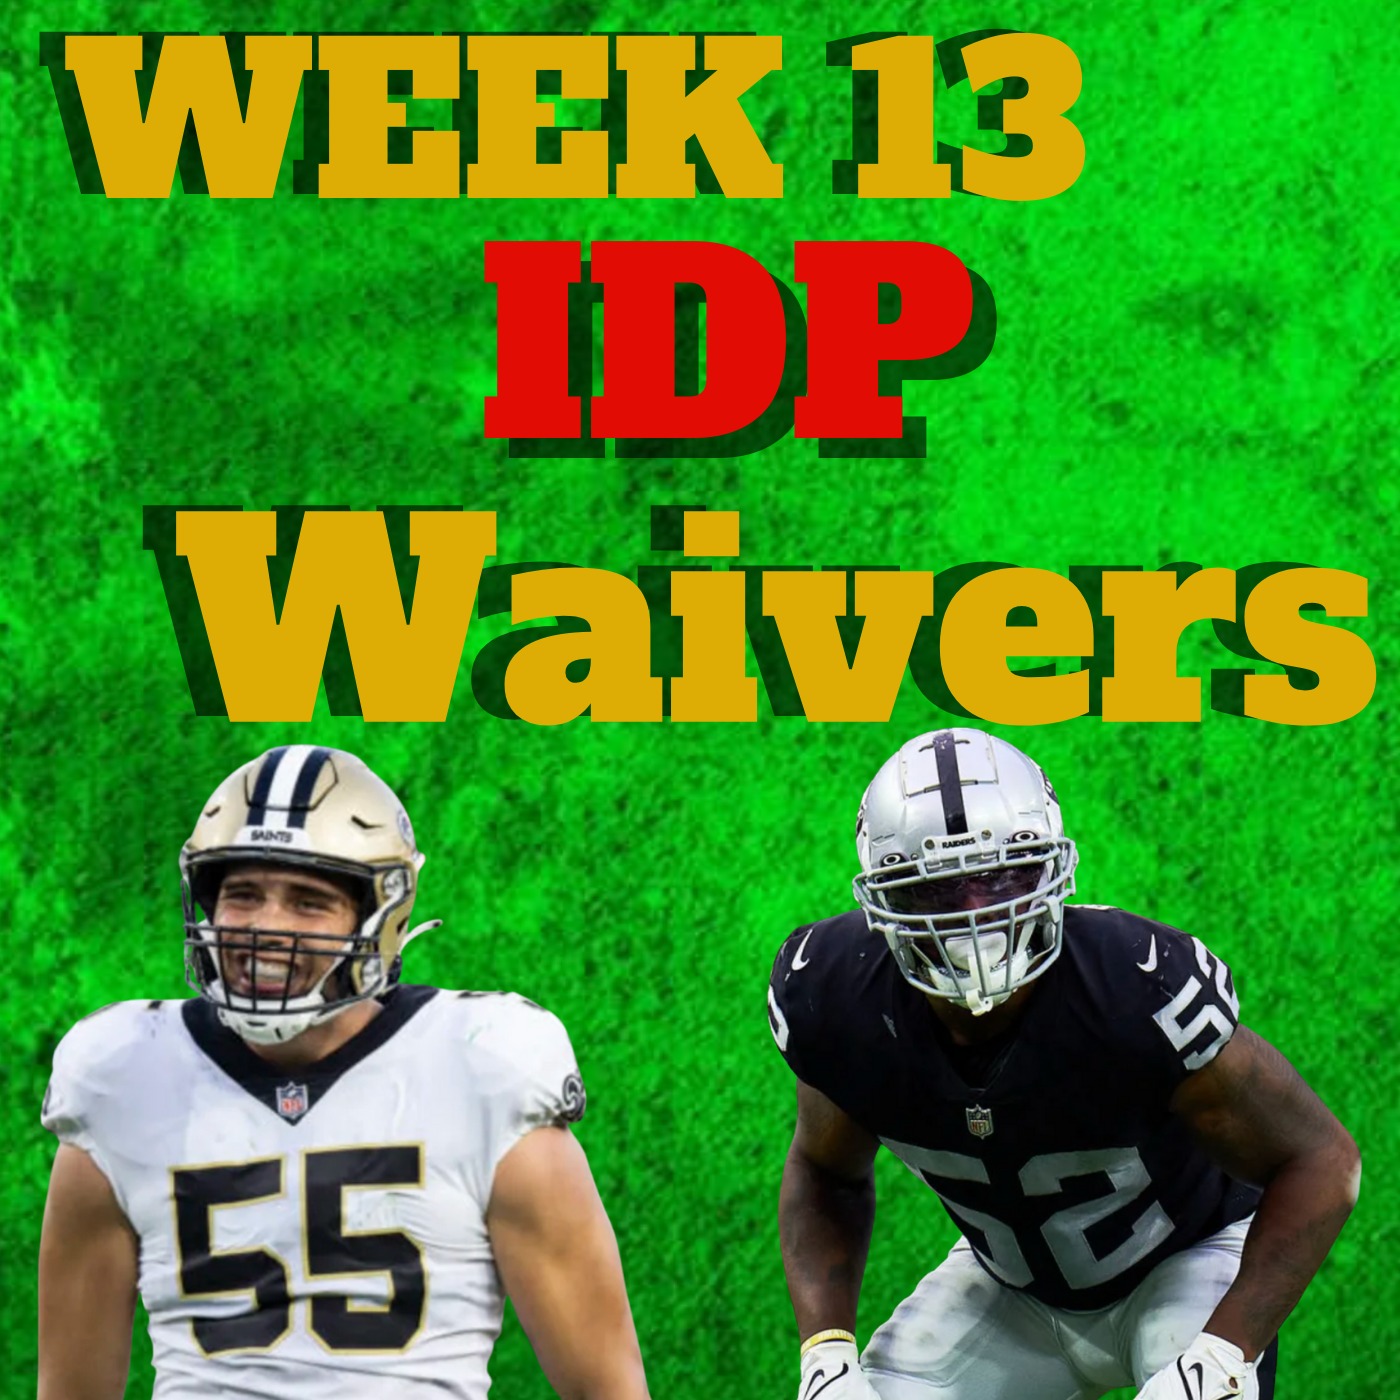 Week 13 IDP Waiver Wire Adds